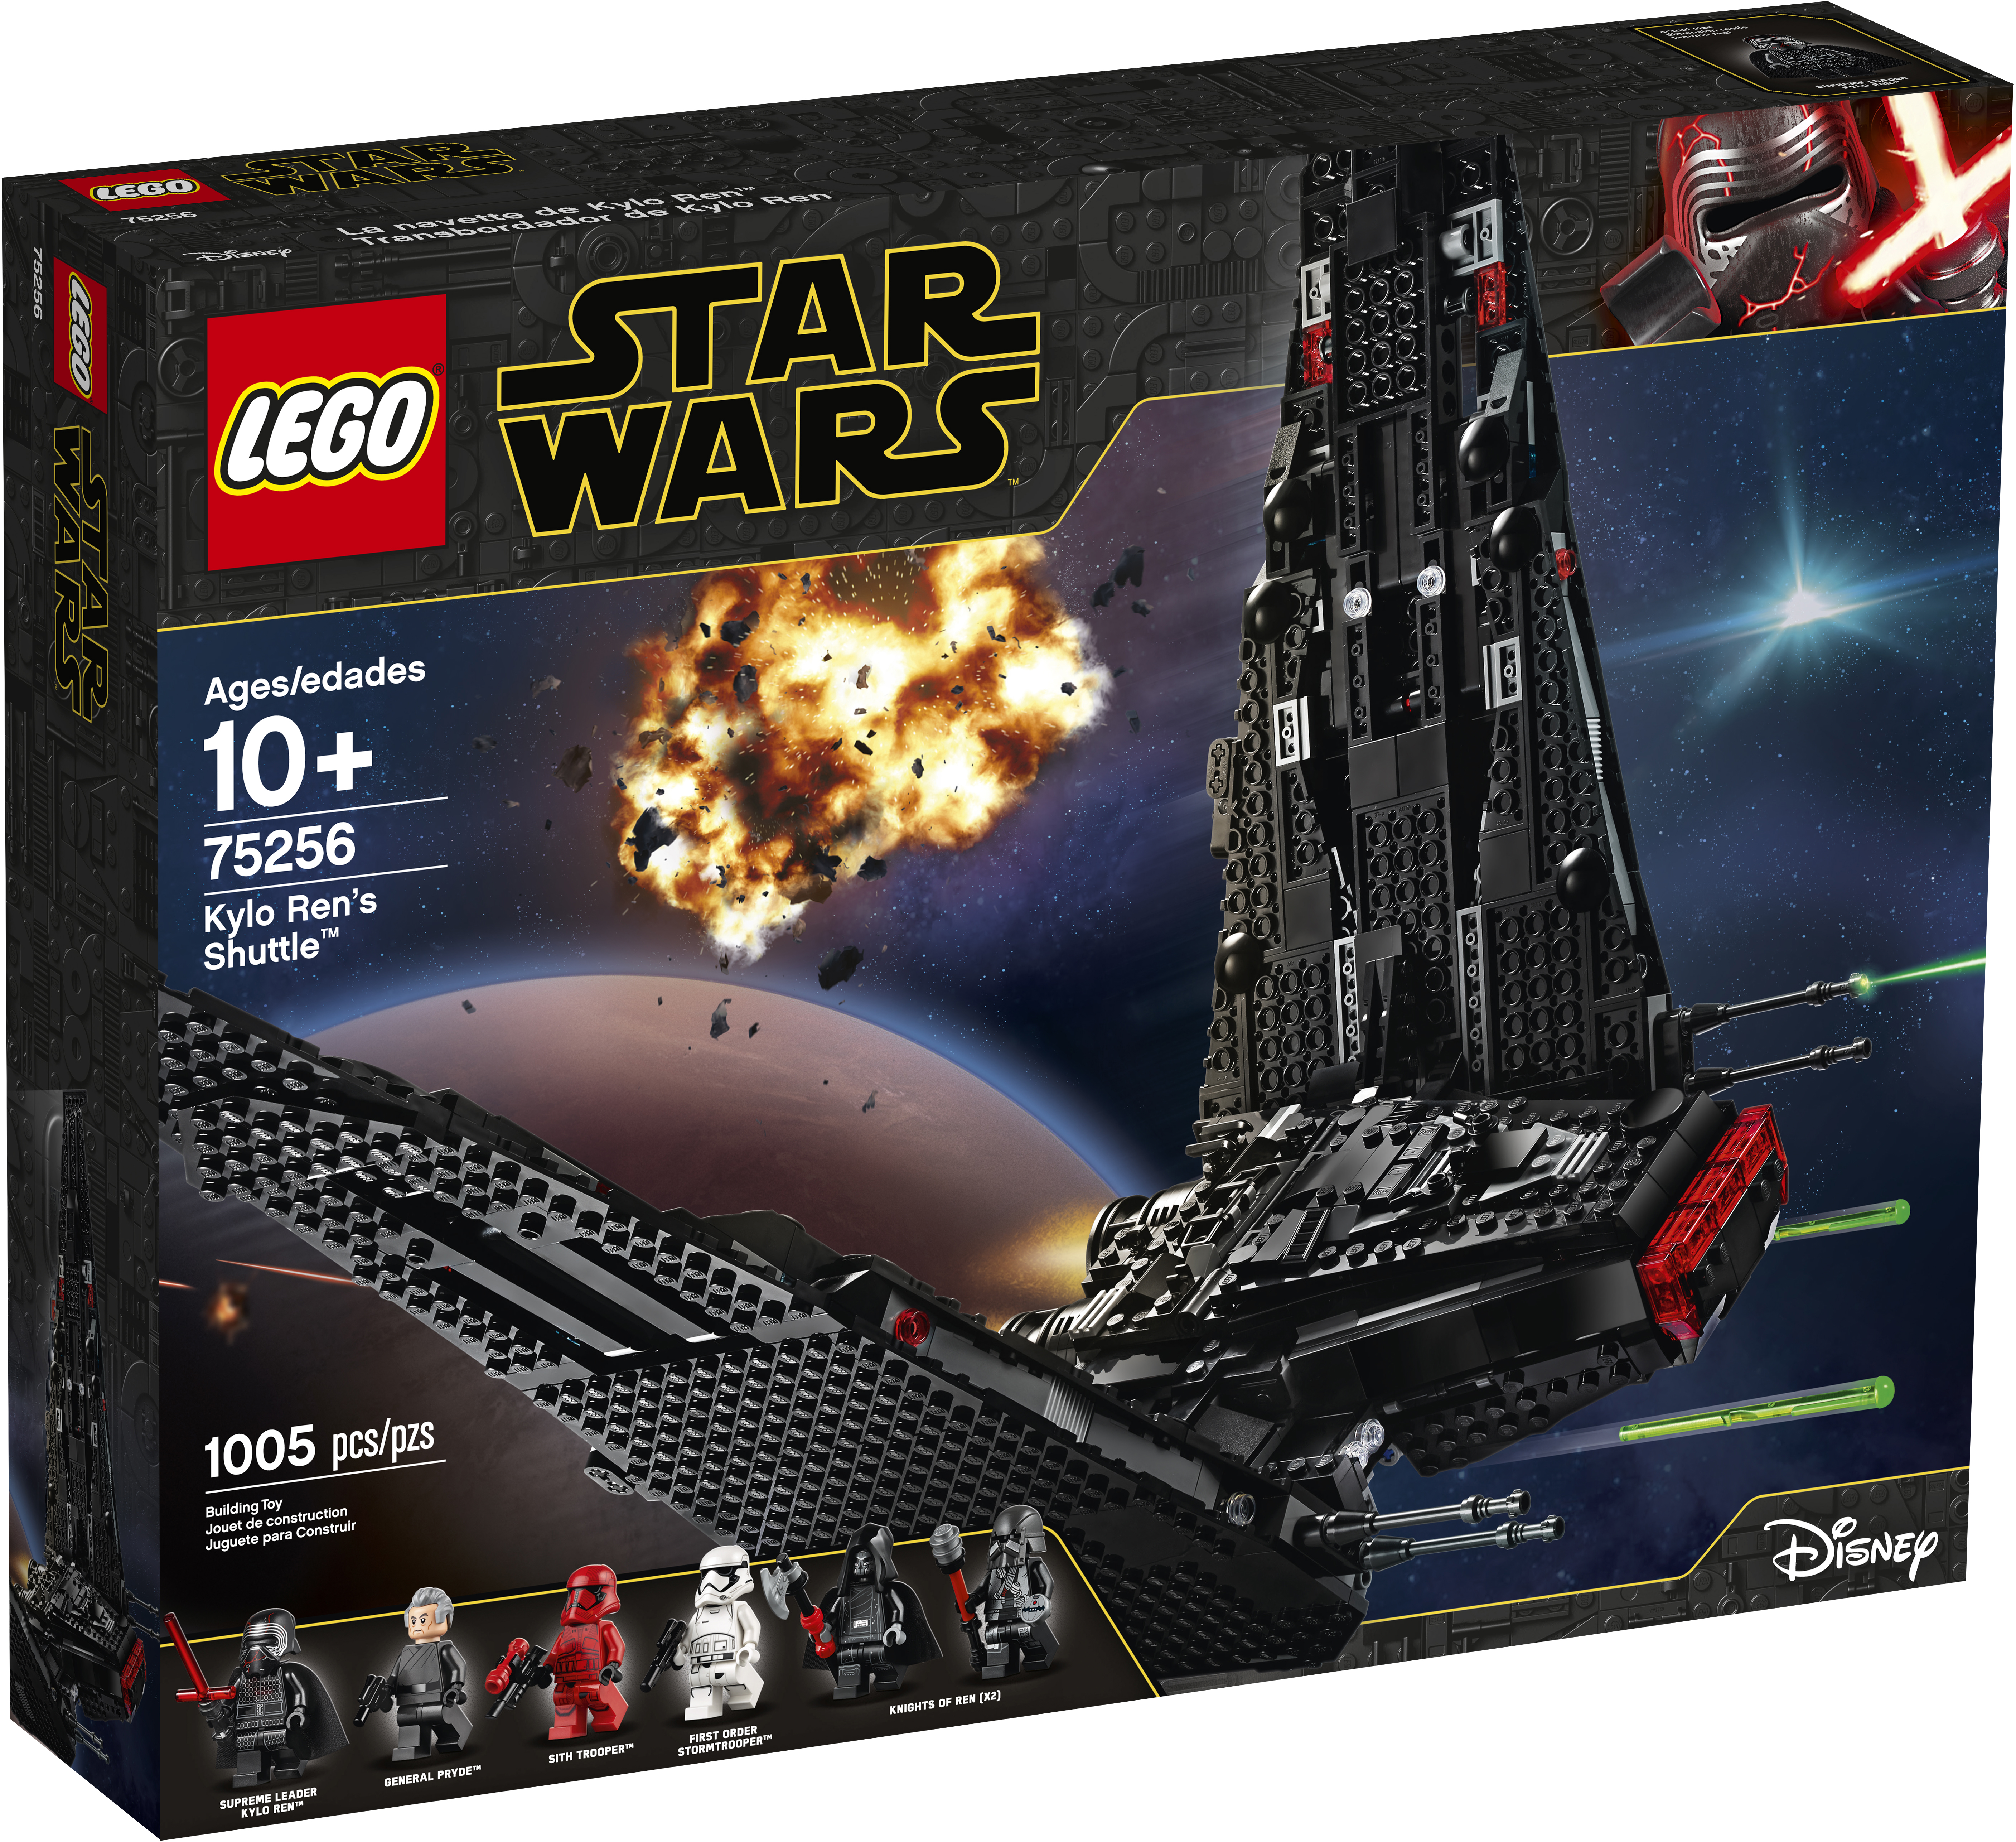 LEGO 'Rise of Skywalker' set features Kylo Ren's shuttle and clues for the upcoming film?